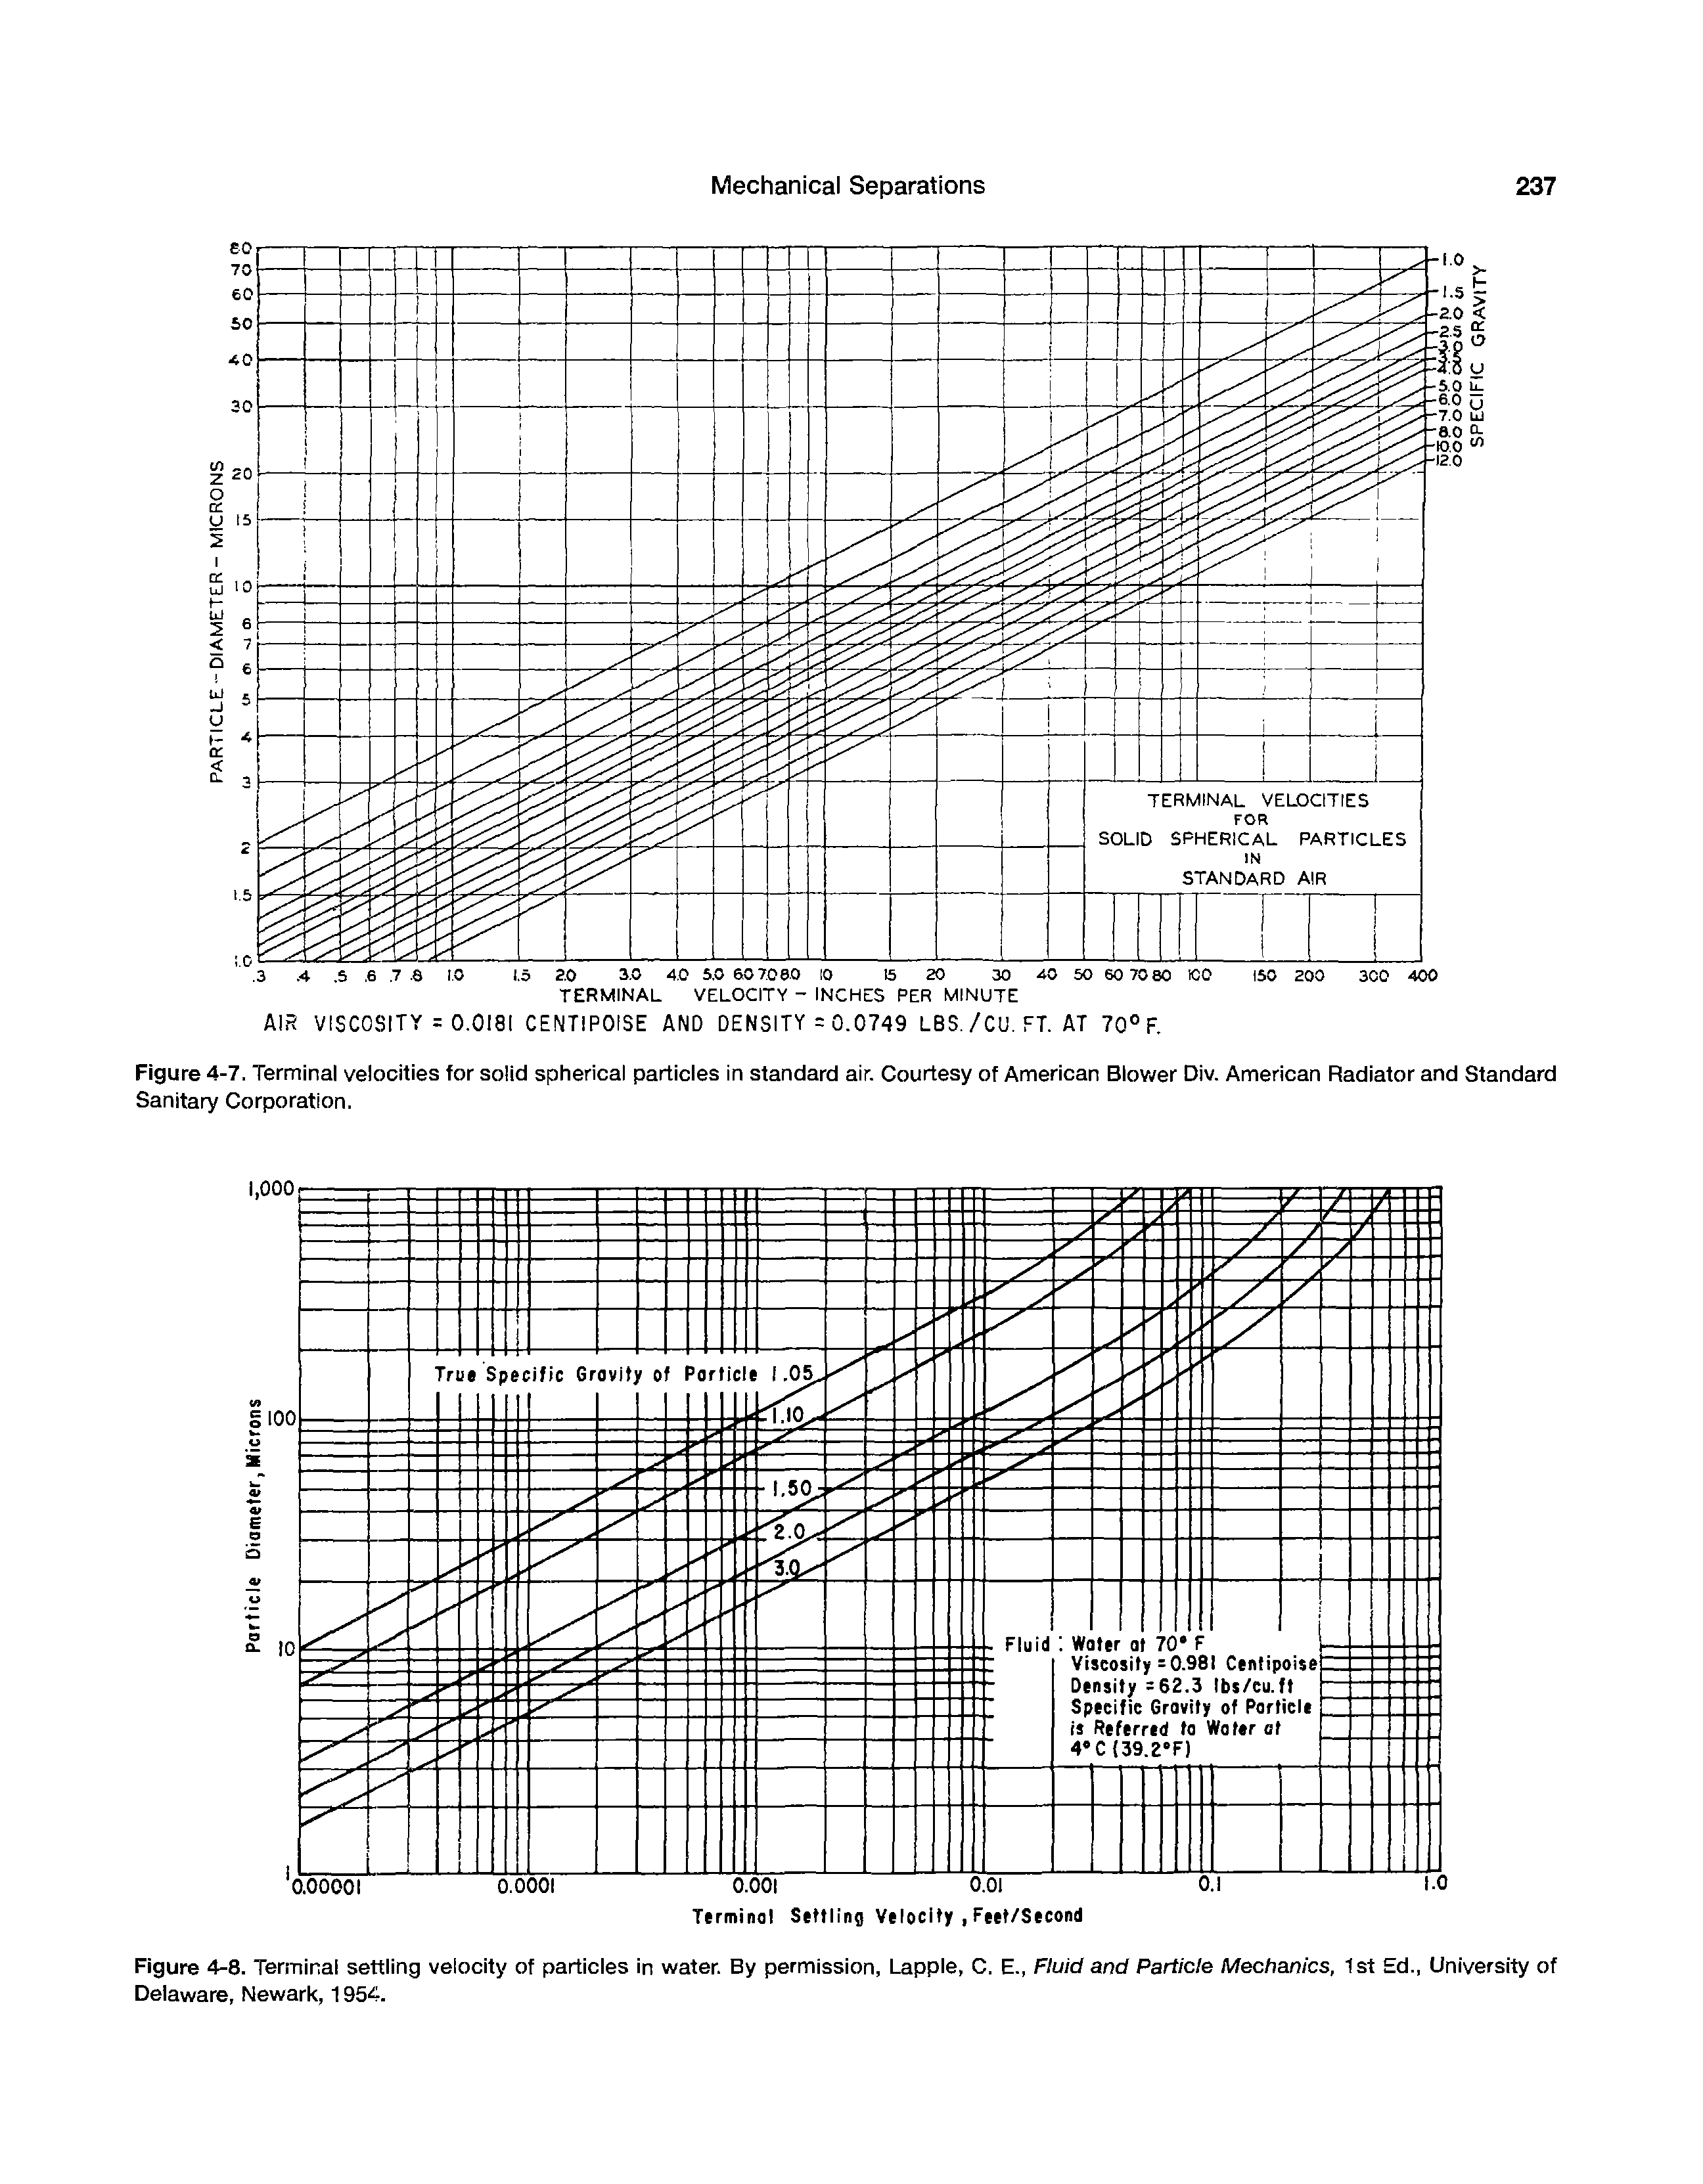 Figure 4-8. Terminal settling velocity of particles in water. By permission, Lapple, C. E., Fluid and Particle Mechanics, 1st Ed., University of Delaware, Newark, 1954.